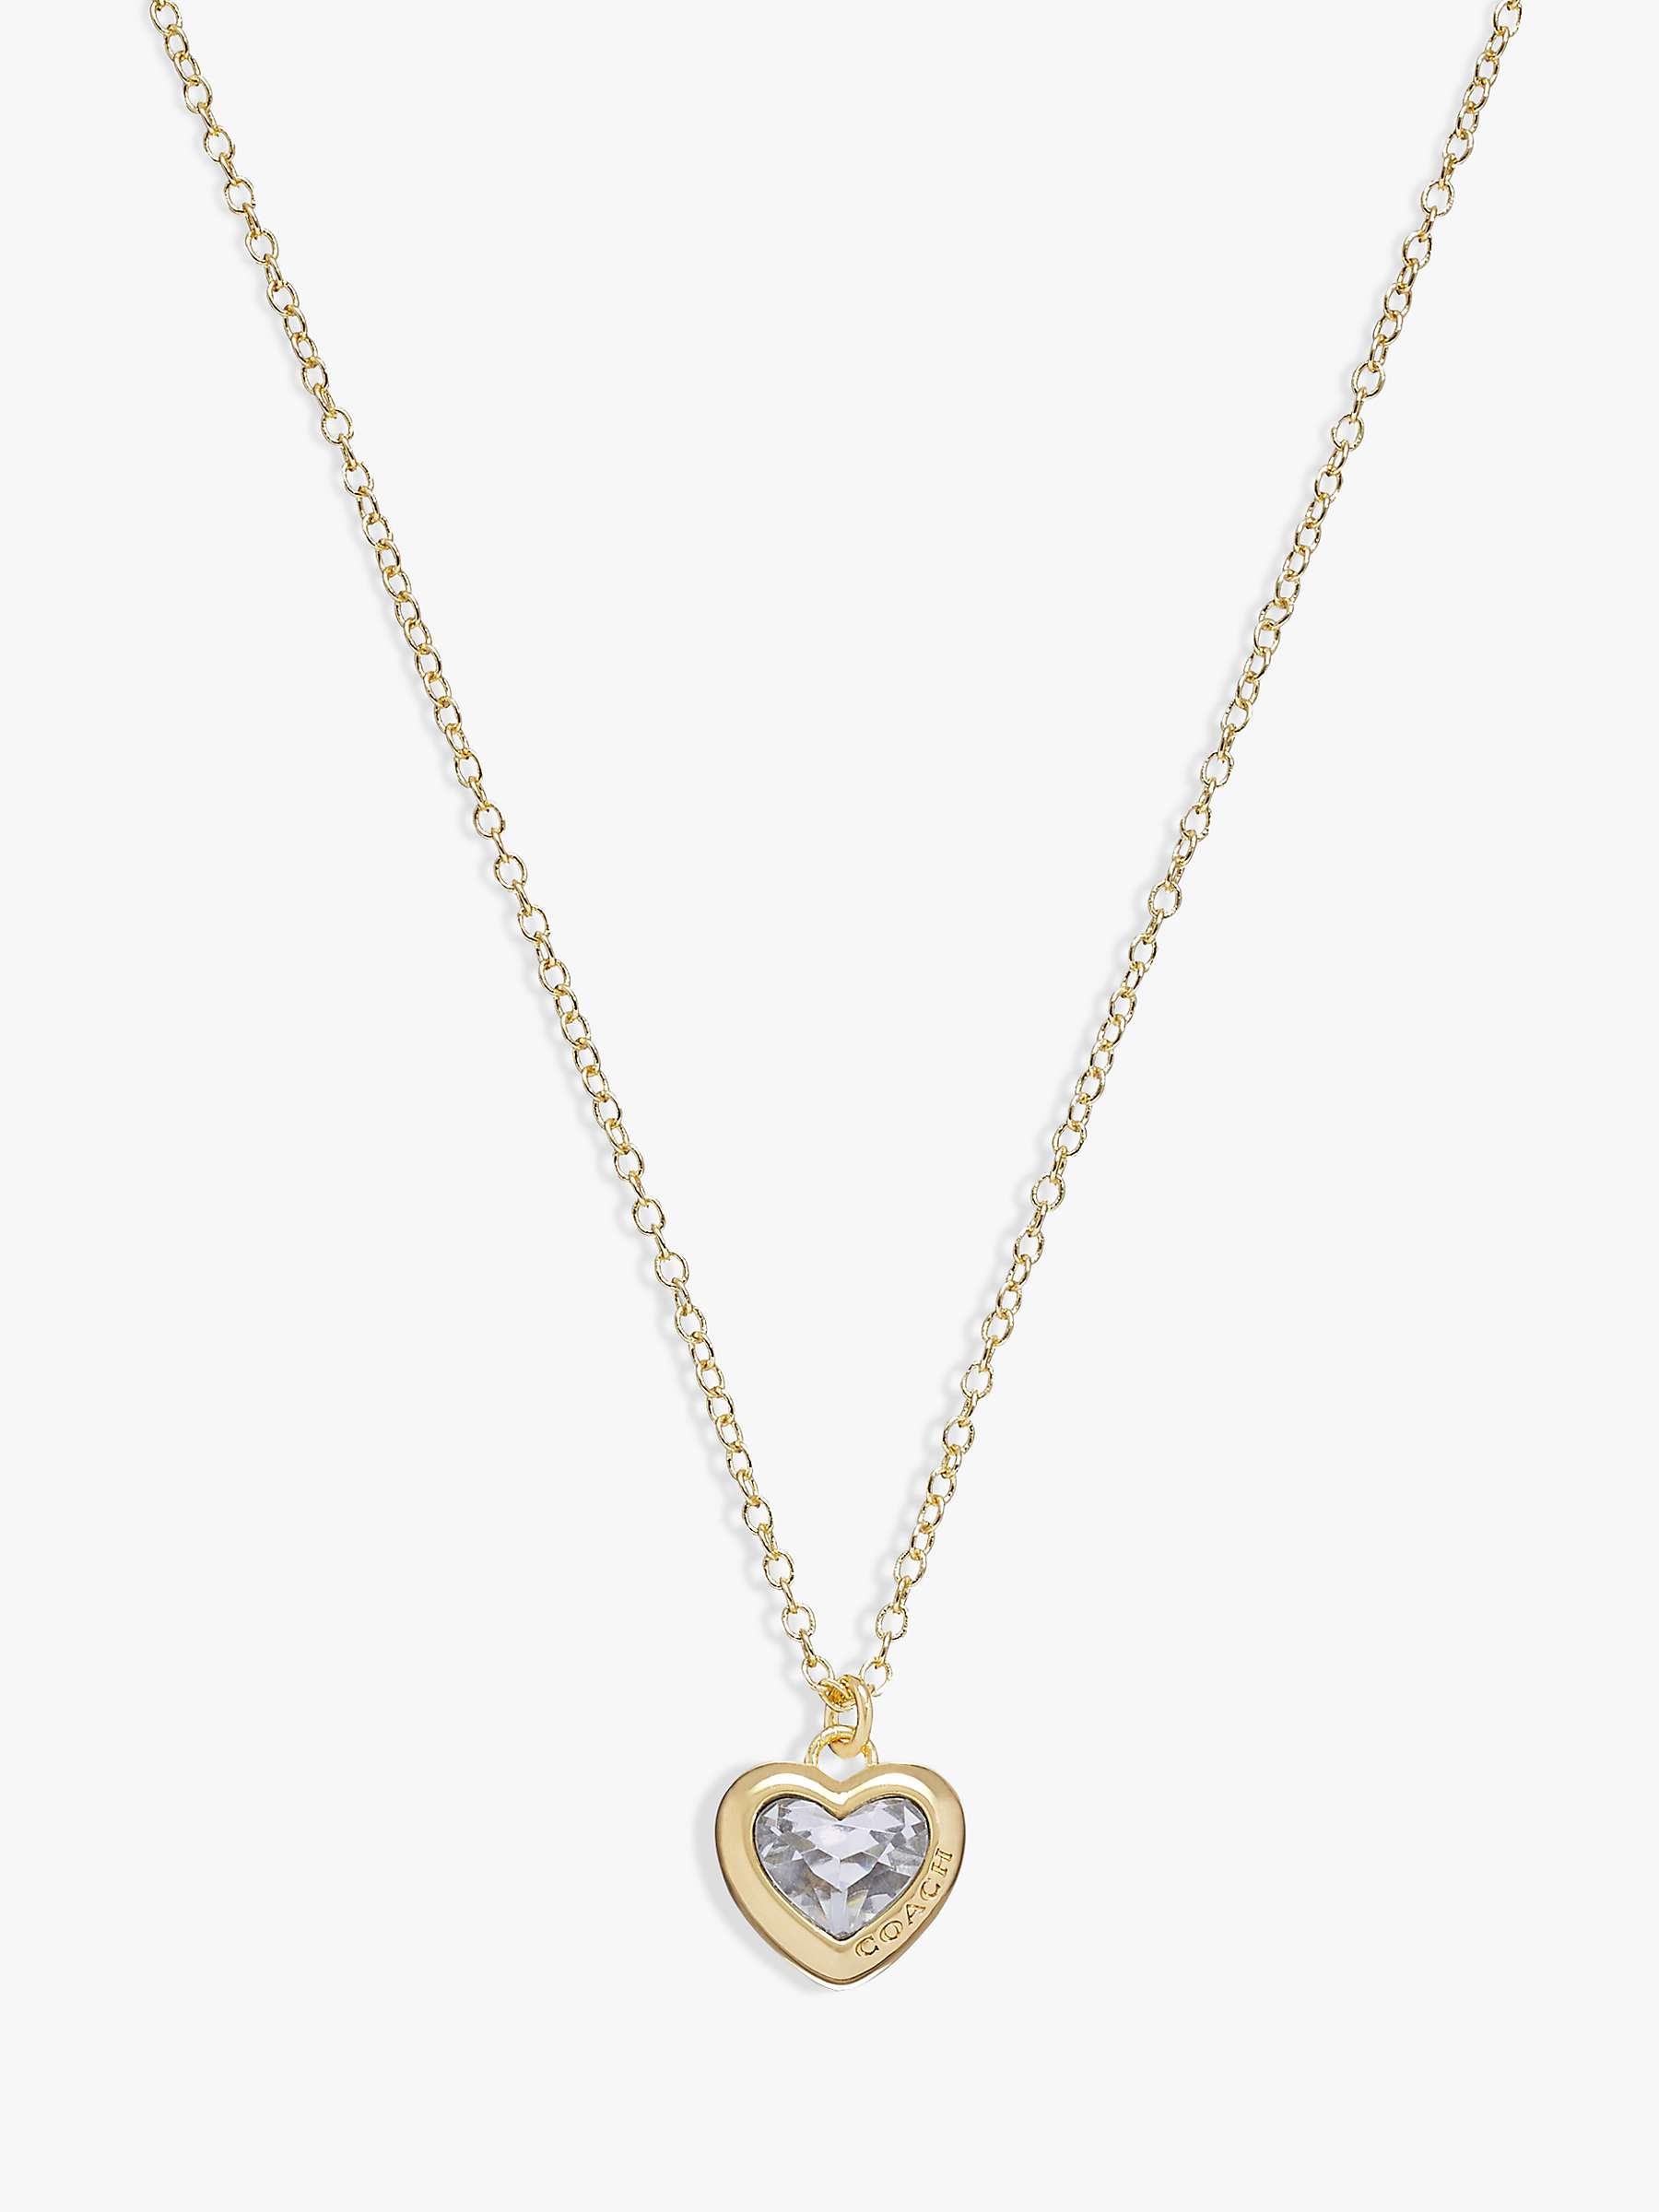 Buy Coach Crystal Heart Pendant Necklace, Gold Online at johnlewis.com